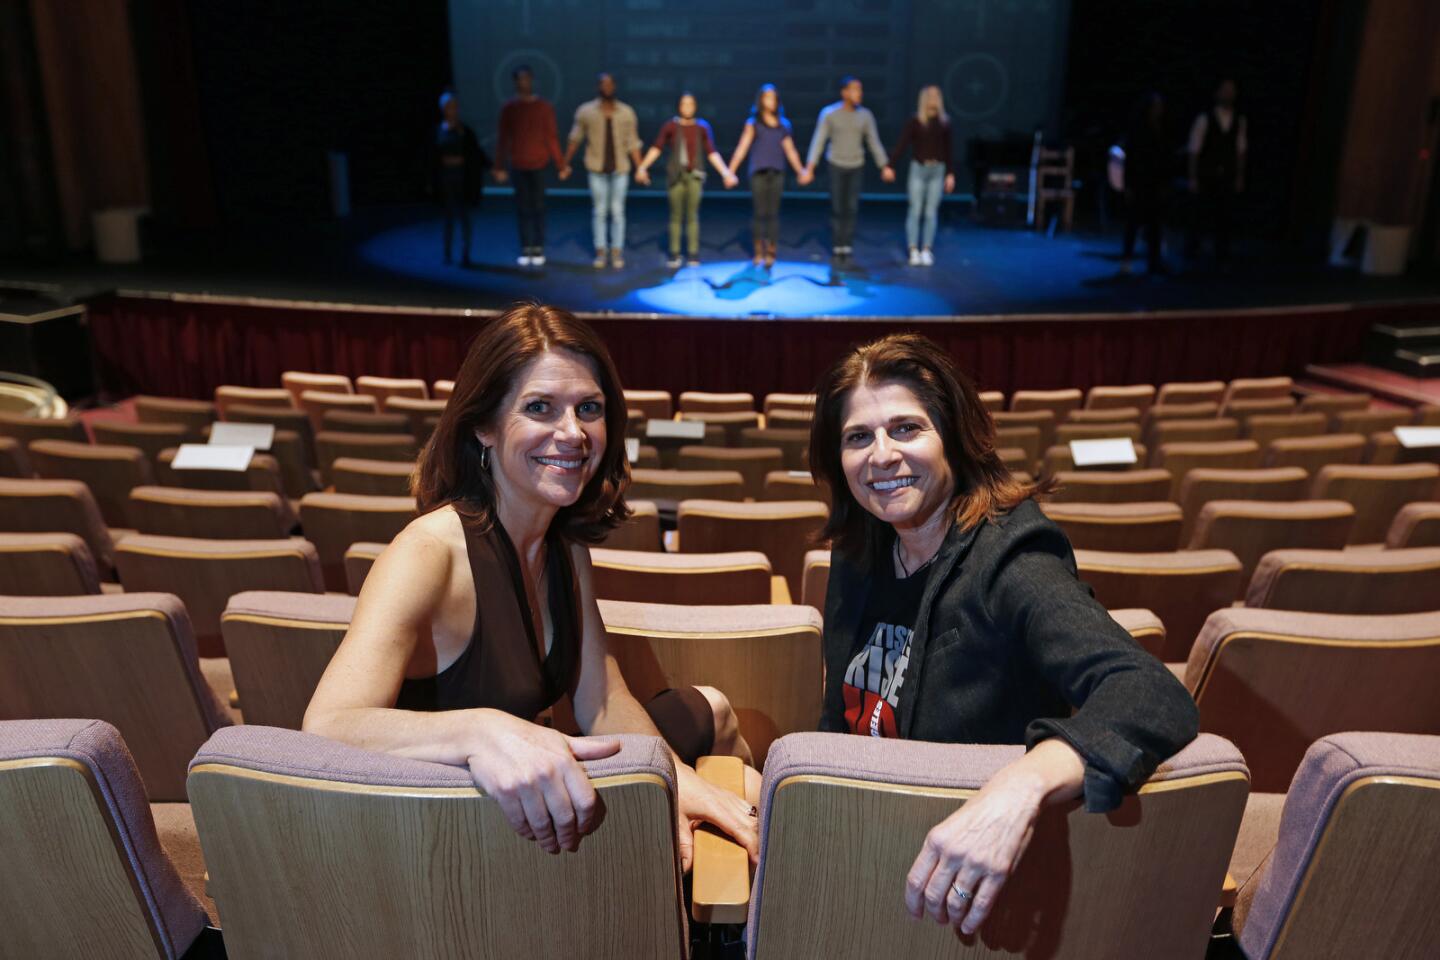 Heidi Godt, left, is co-producer and Sue Hamilton is executive producer of "E Pluribus Unum: Out of Many, One," presented by Artists Rise Up Los Angeles at the El Portal Theatre in North Hollywood.